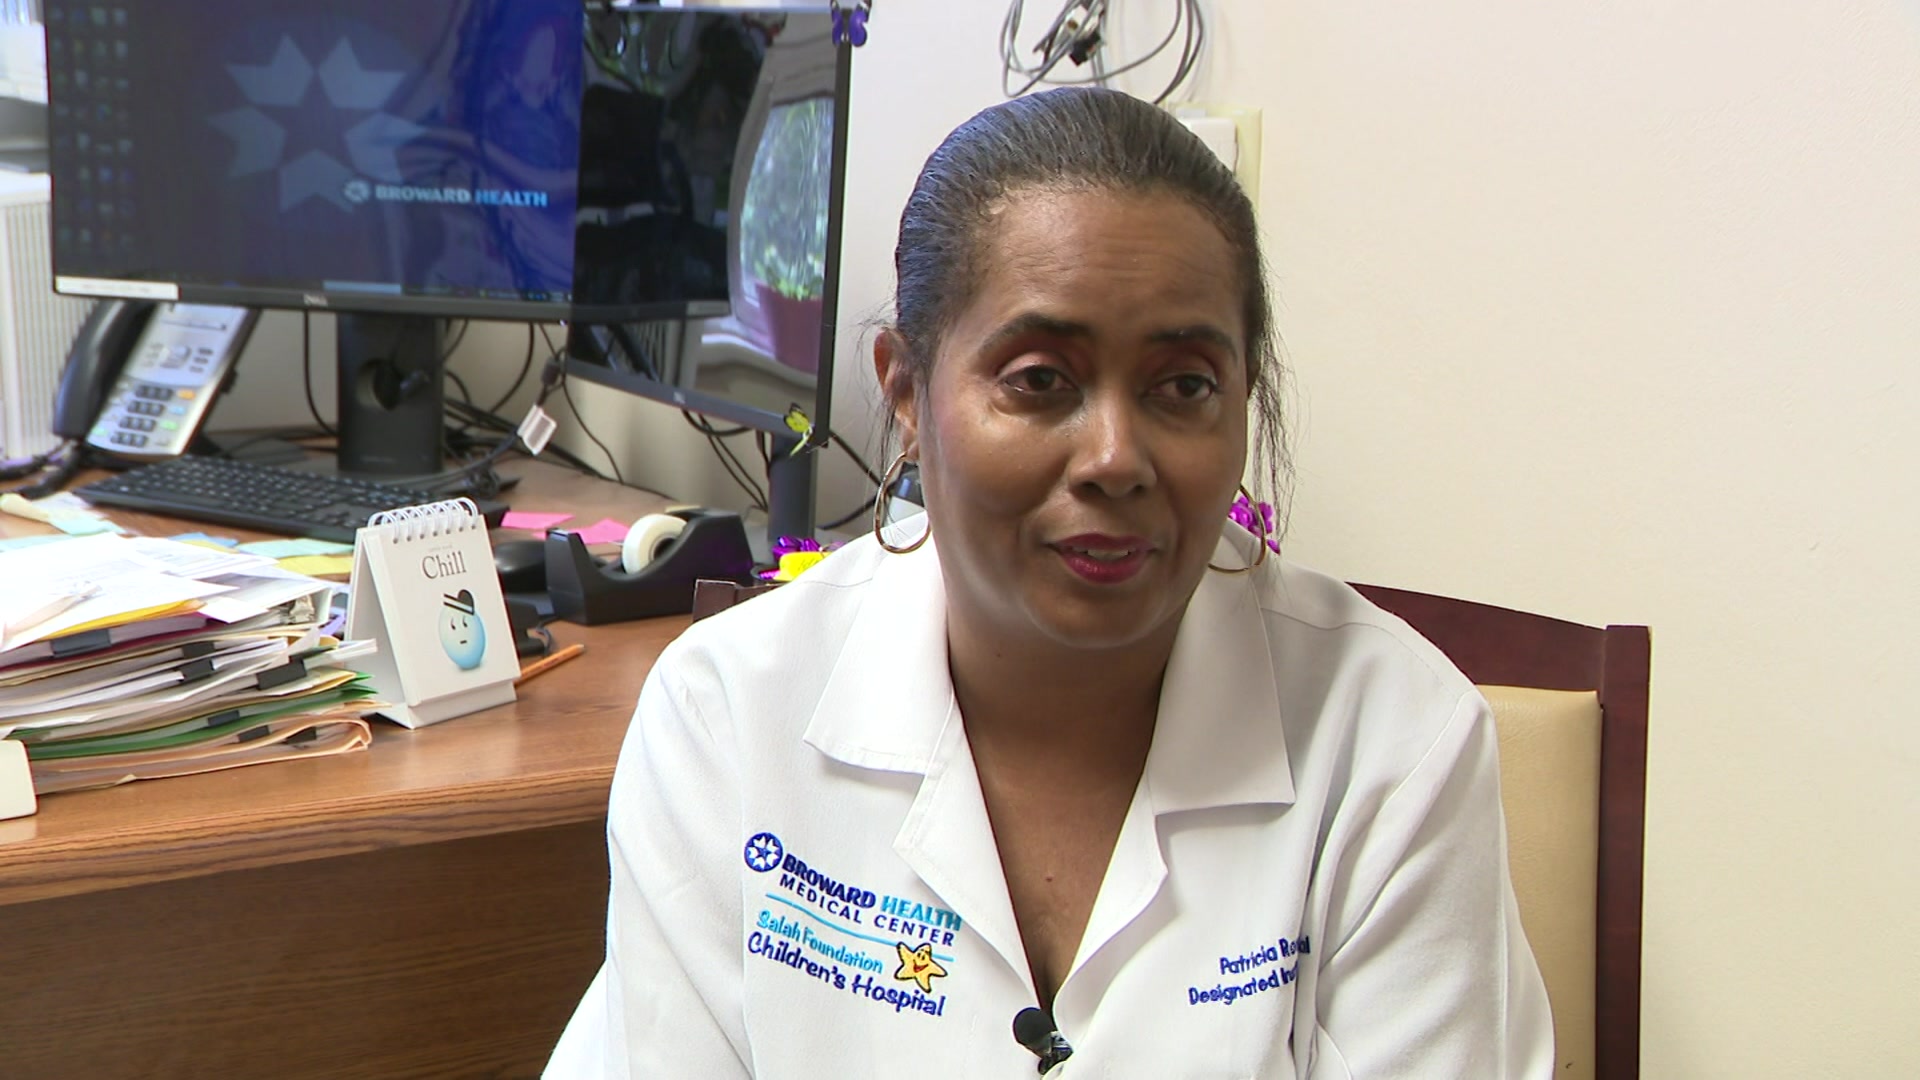 Black History Month: Dr. Patricia Rowe-King Empowers, Inspires Those Around Her